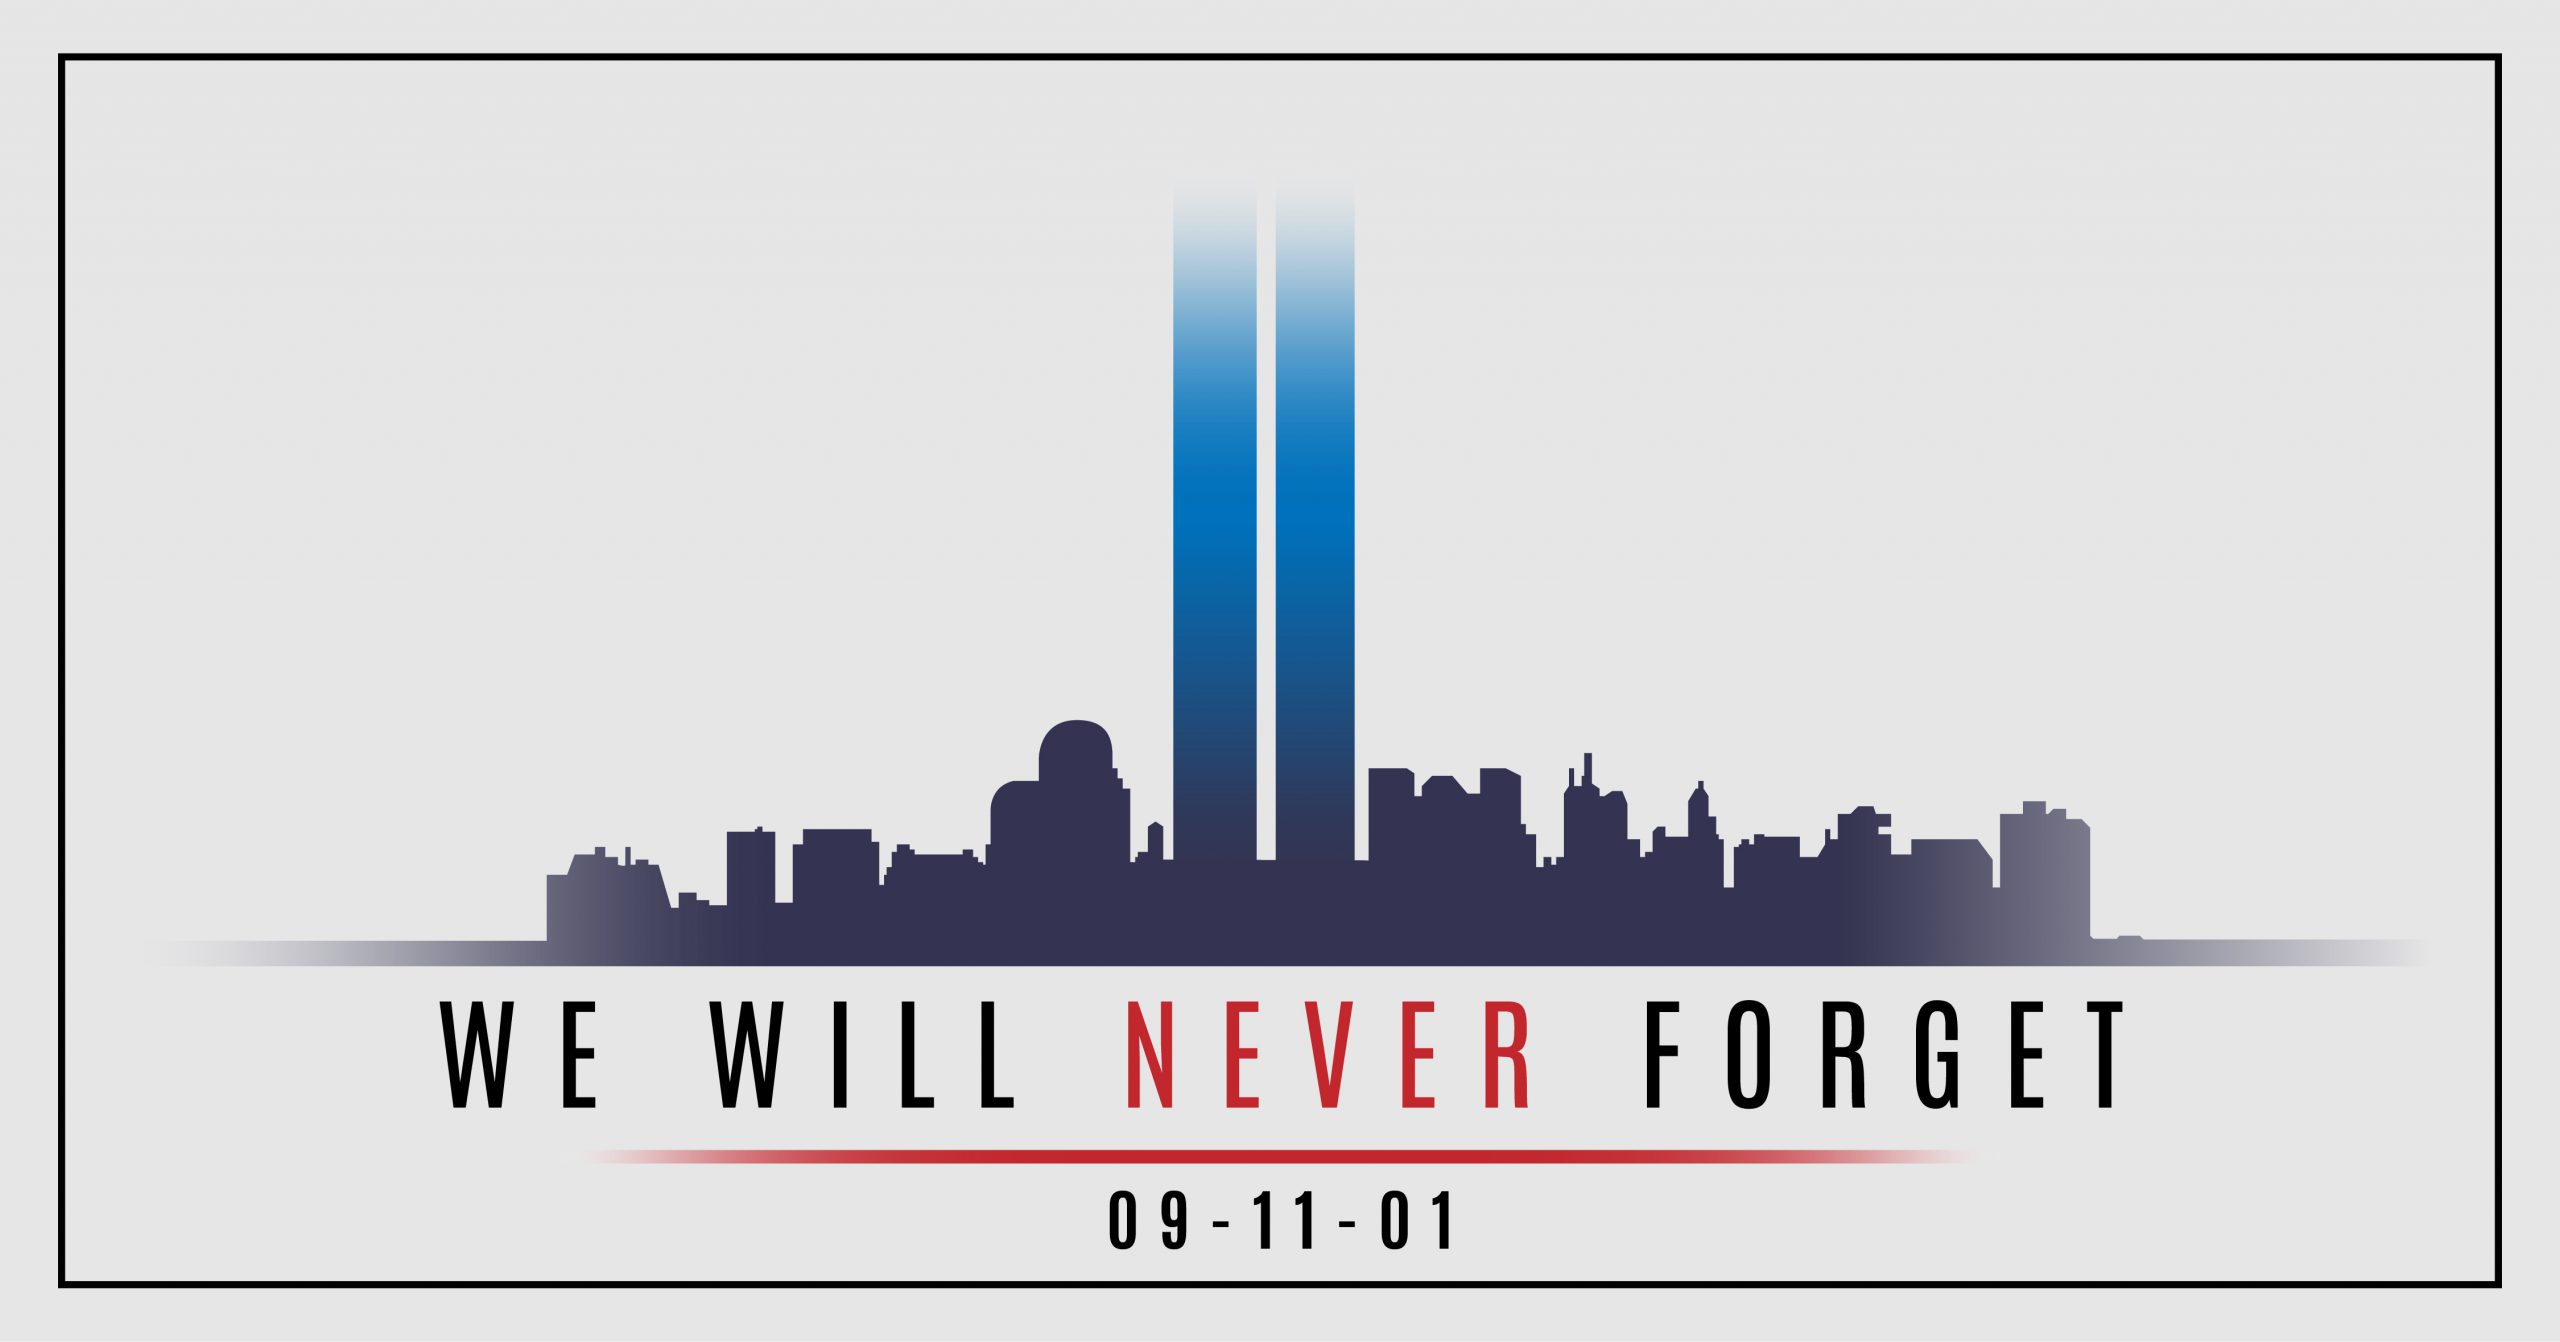 Graphic showing beams of light out of the New York City Skyline. "We Will Never Forget" and 09.11.01 appear below the skyline